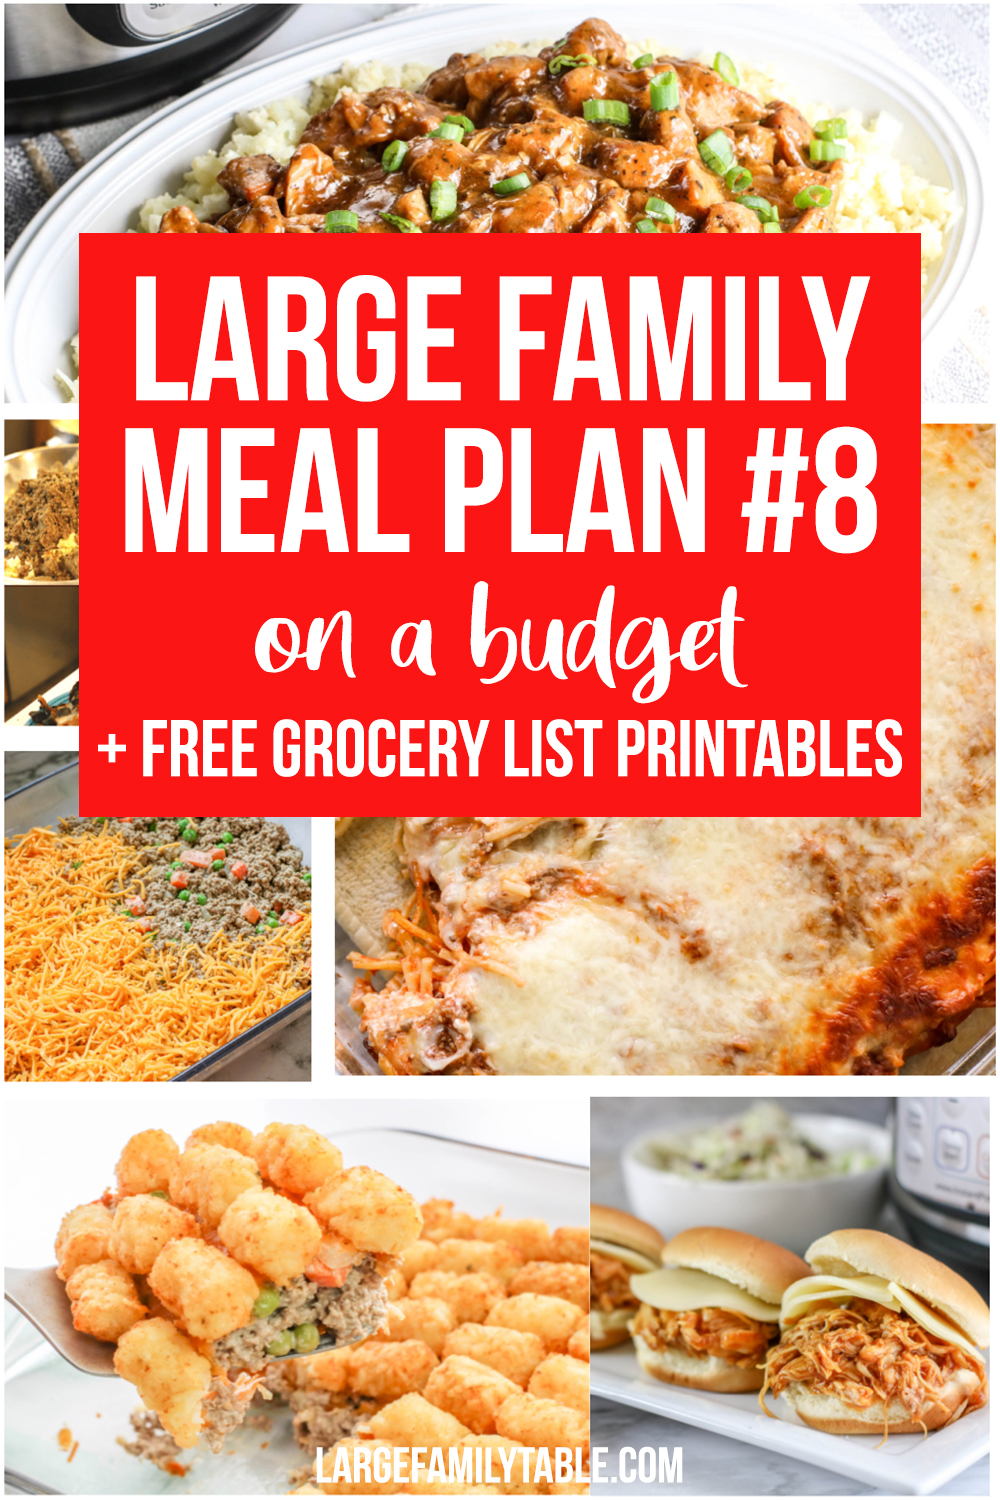 Budget-friendly family meal packs